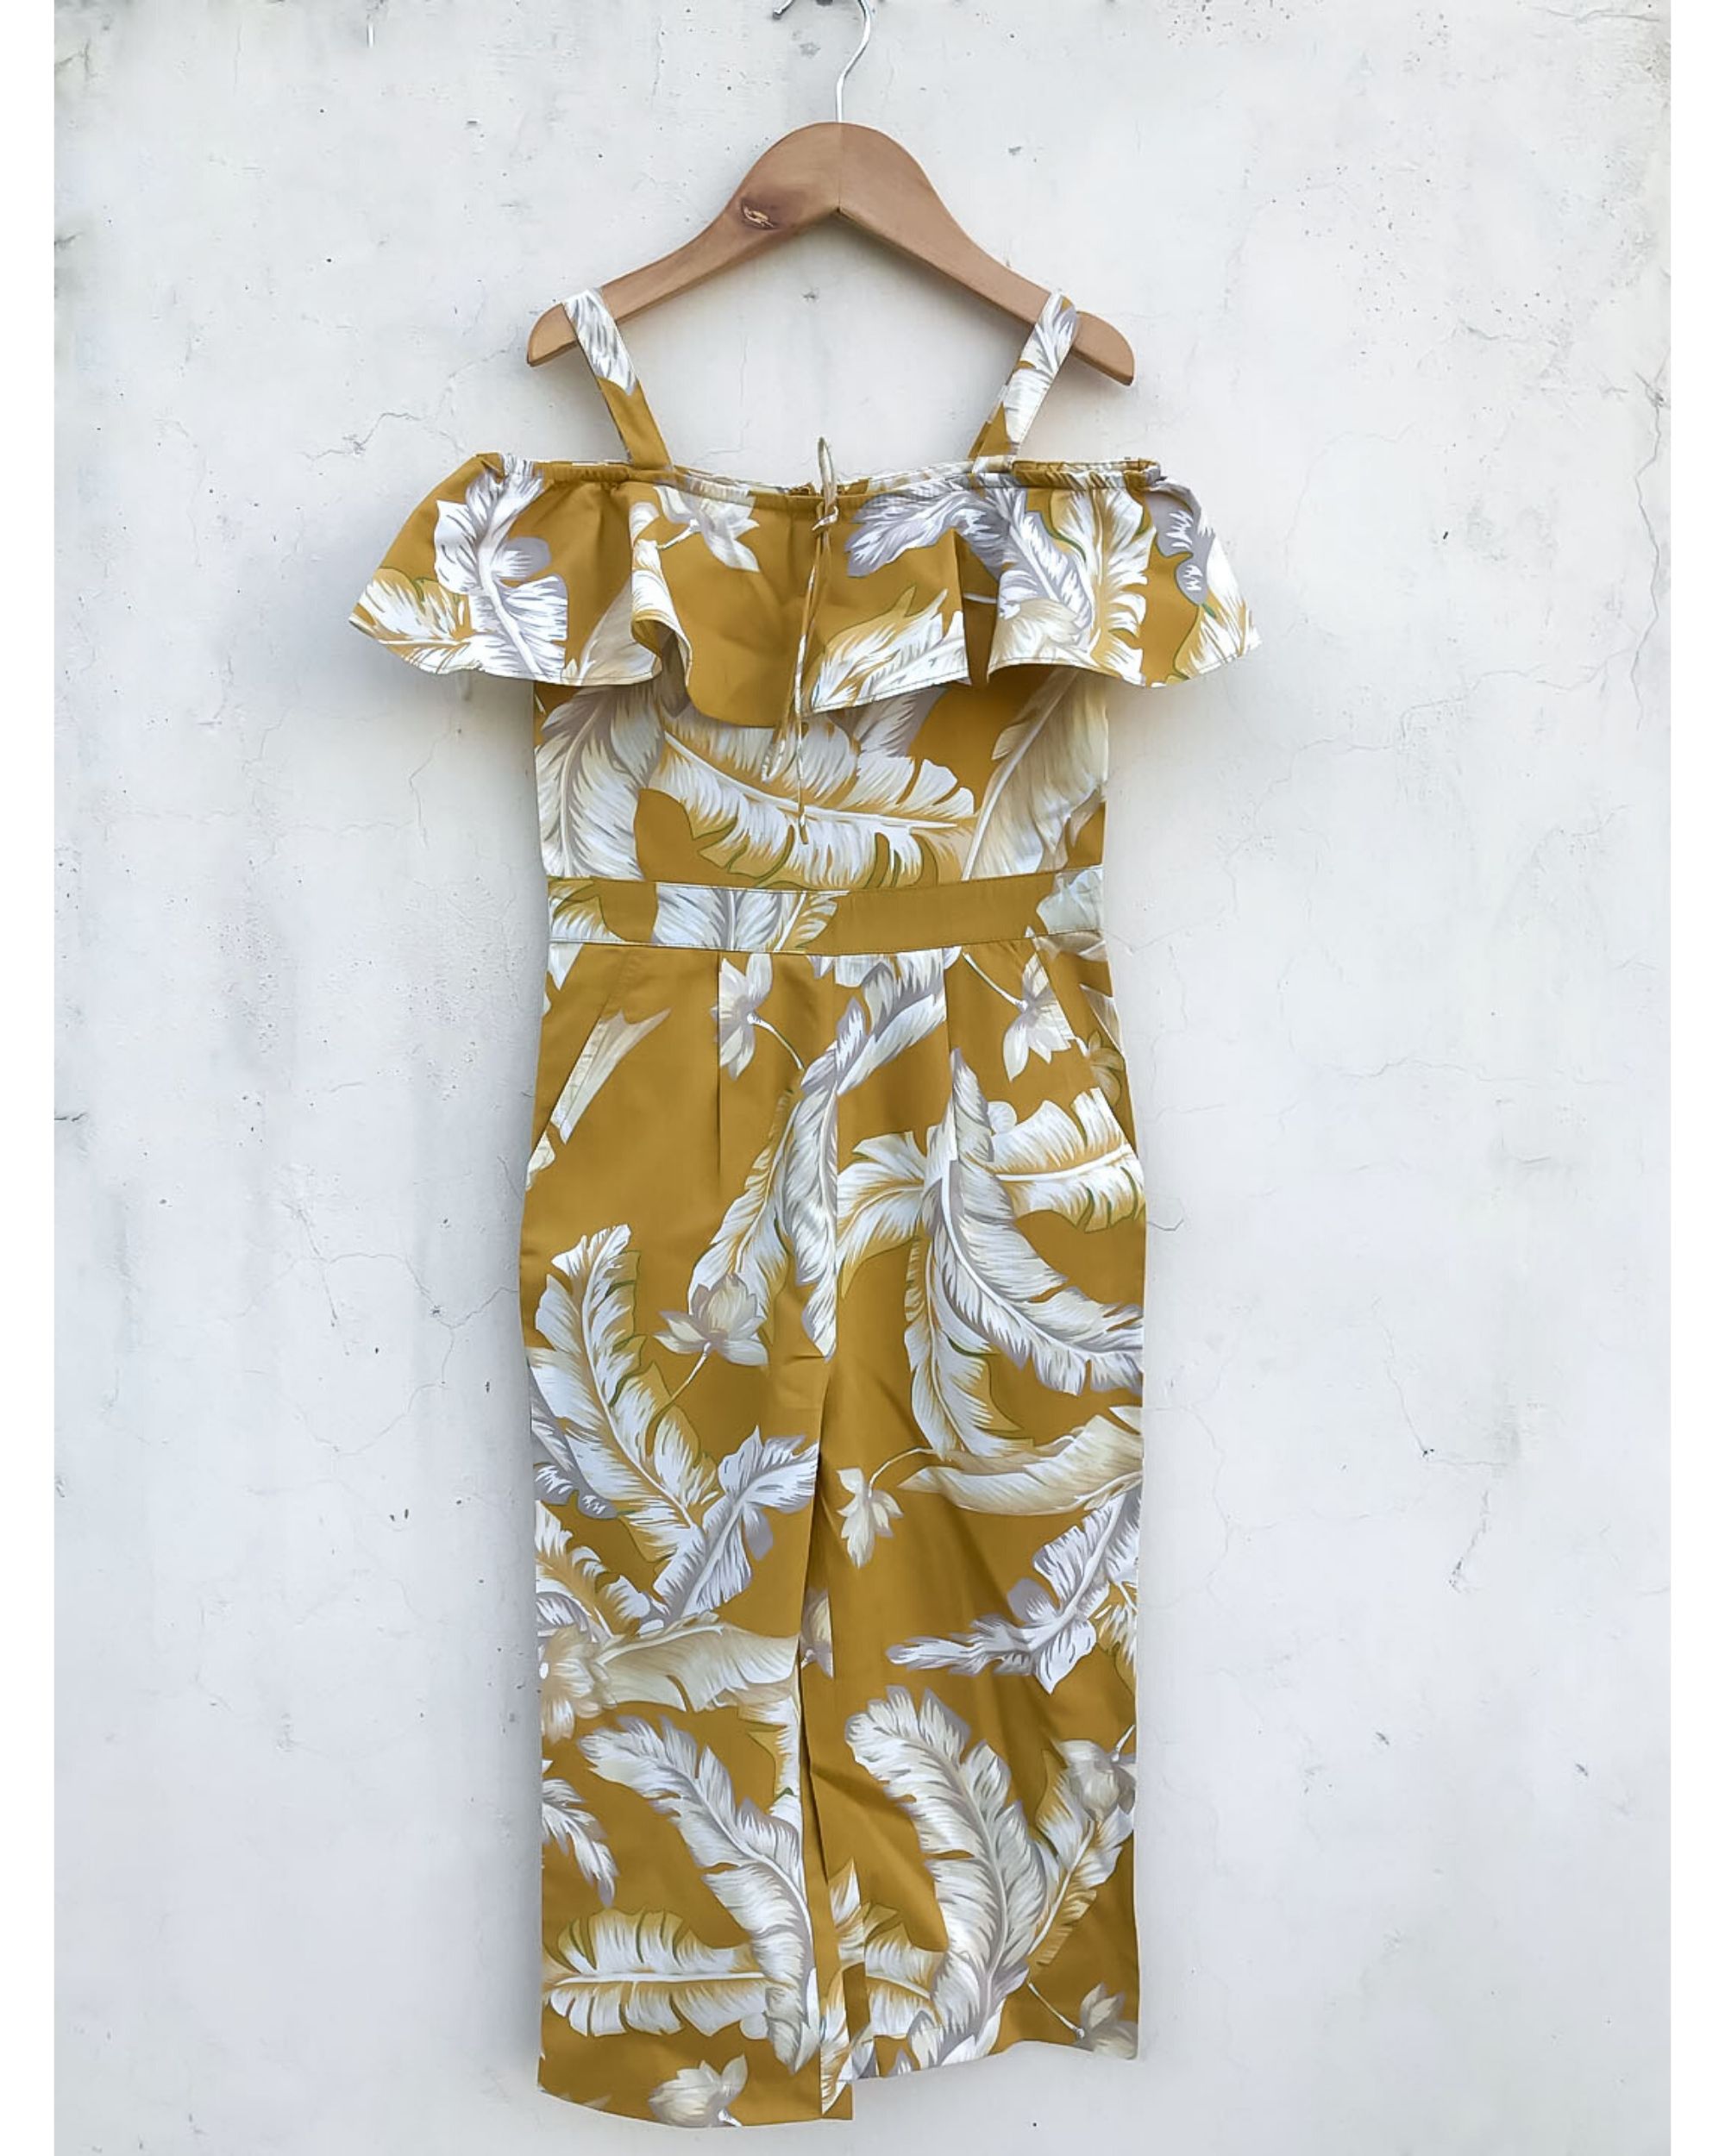 Mustard yellow cold shoulder jumpsuit by Luyk | The Secret Label